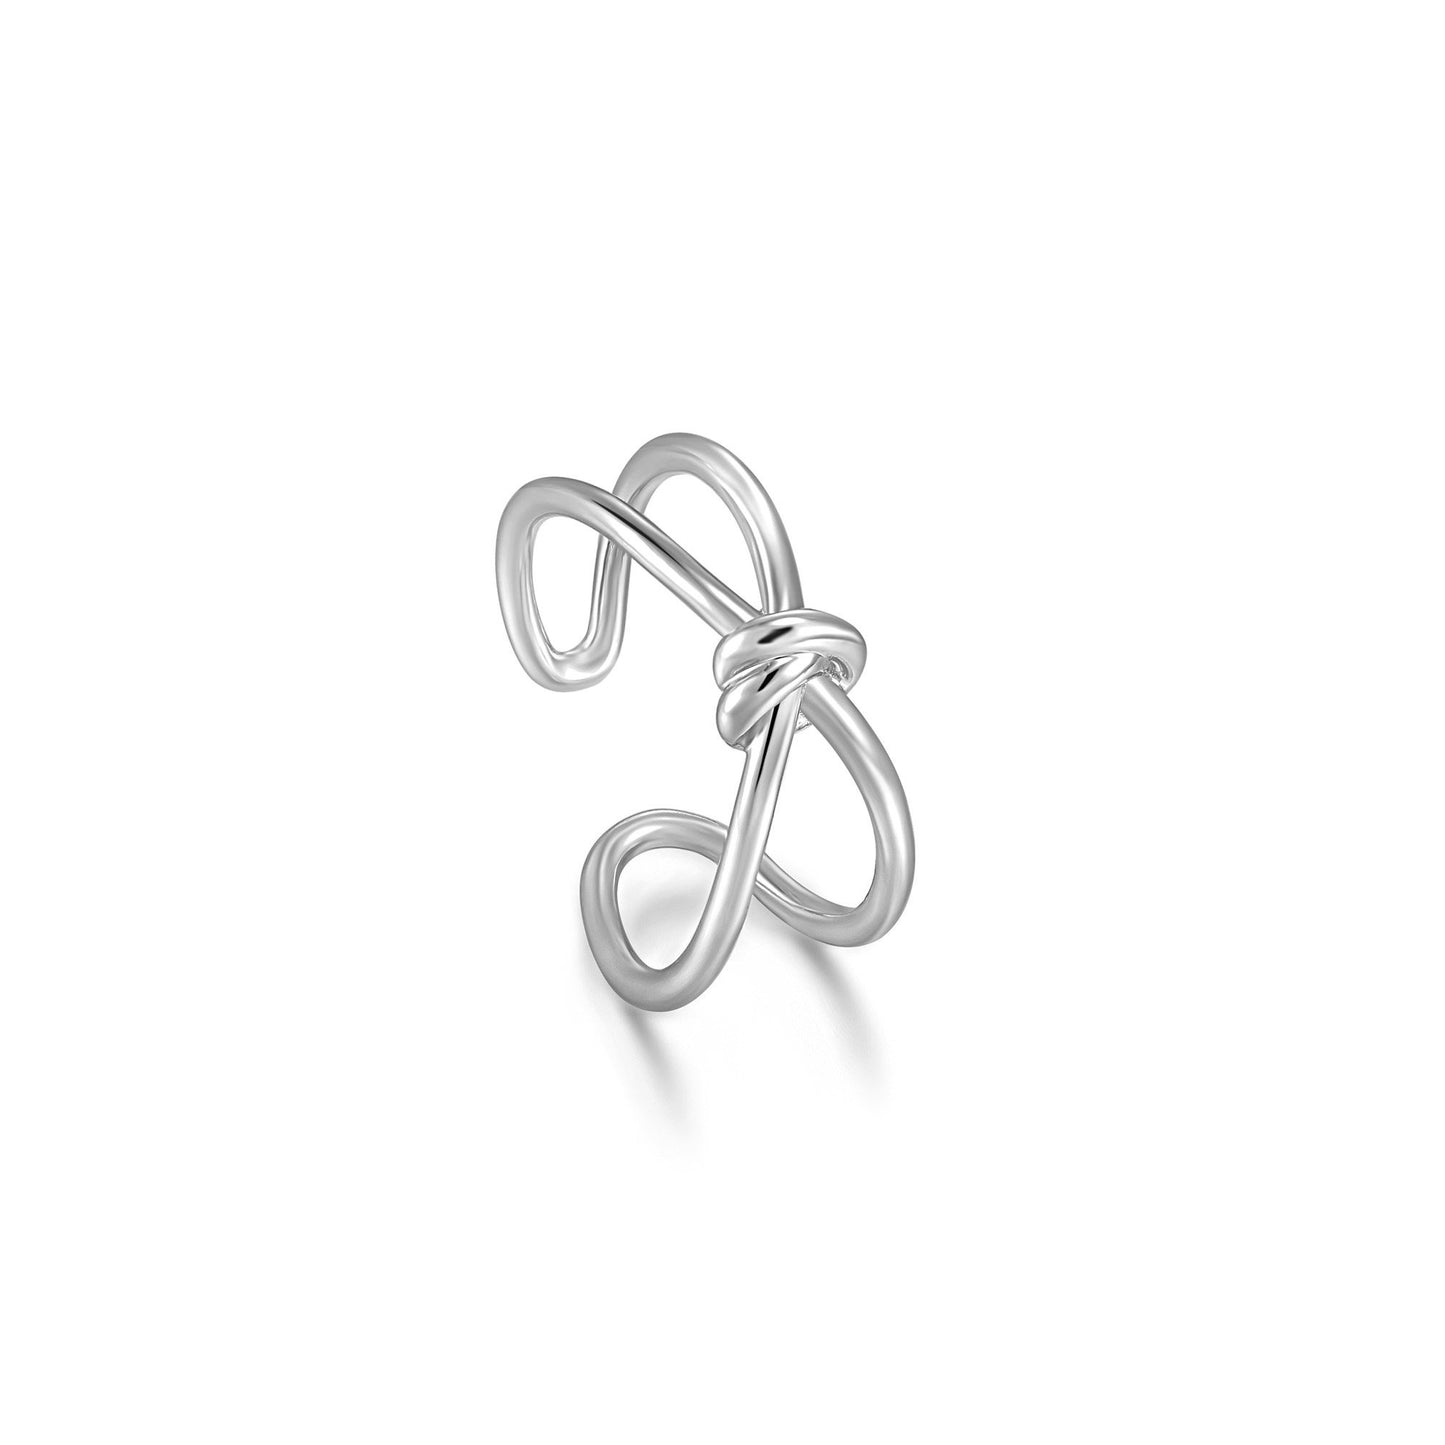 ANIA HAIE ANIA HAIE - Silver Knot Double Band Adjustable Ring available at The Good Life Boutique